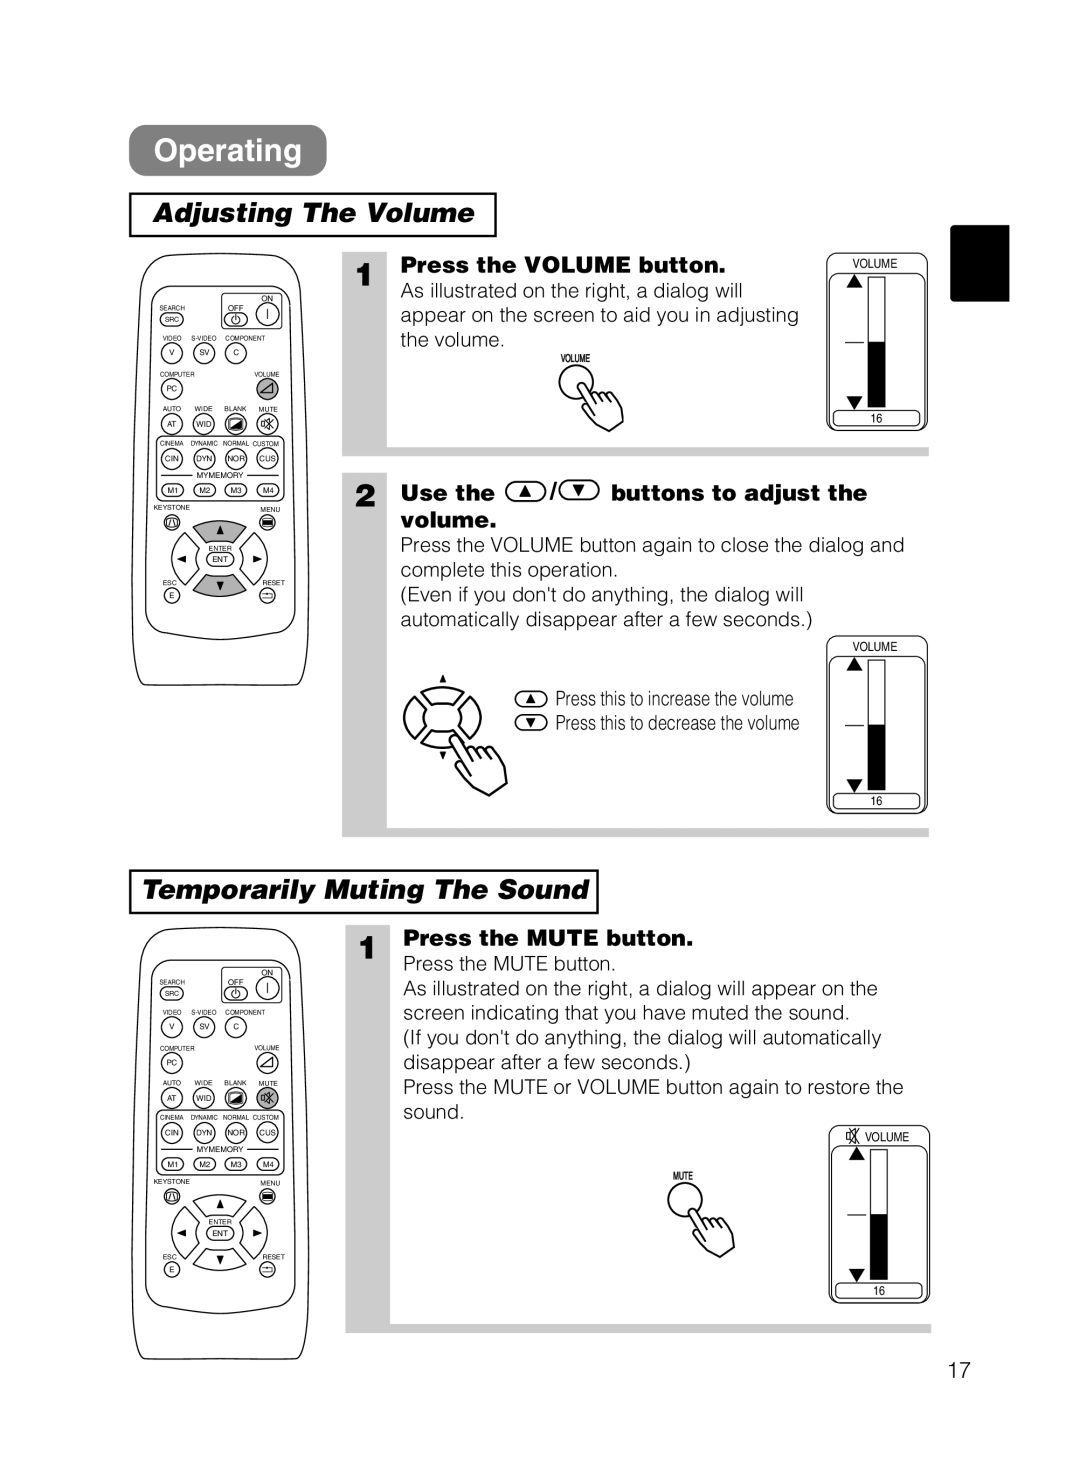 Hitachi HOME-1 Operating, Adjusting The Volume, Temporarily Muting The Sound, Press the VOLUME button, Use the, volume 